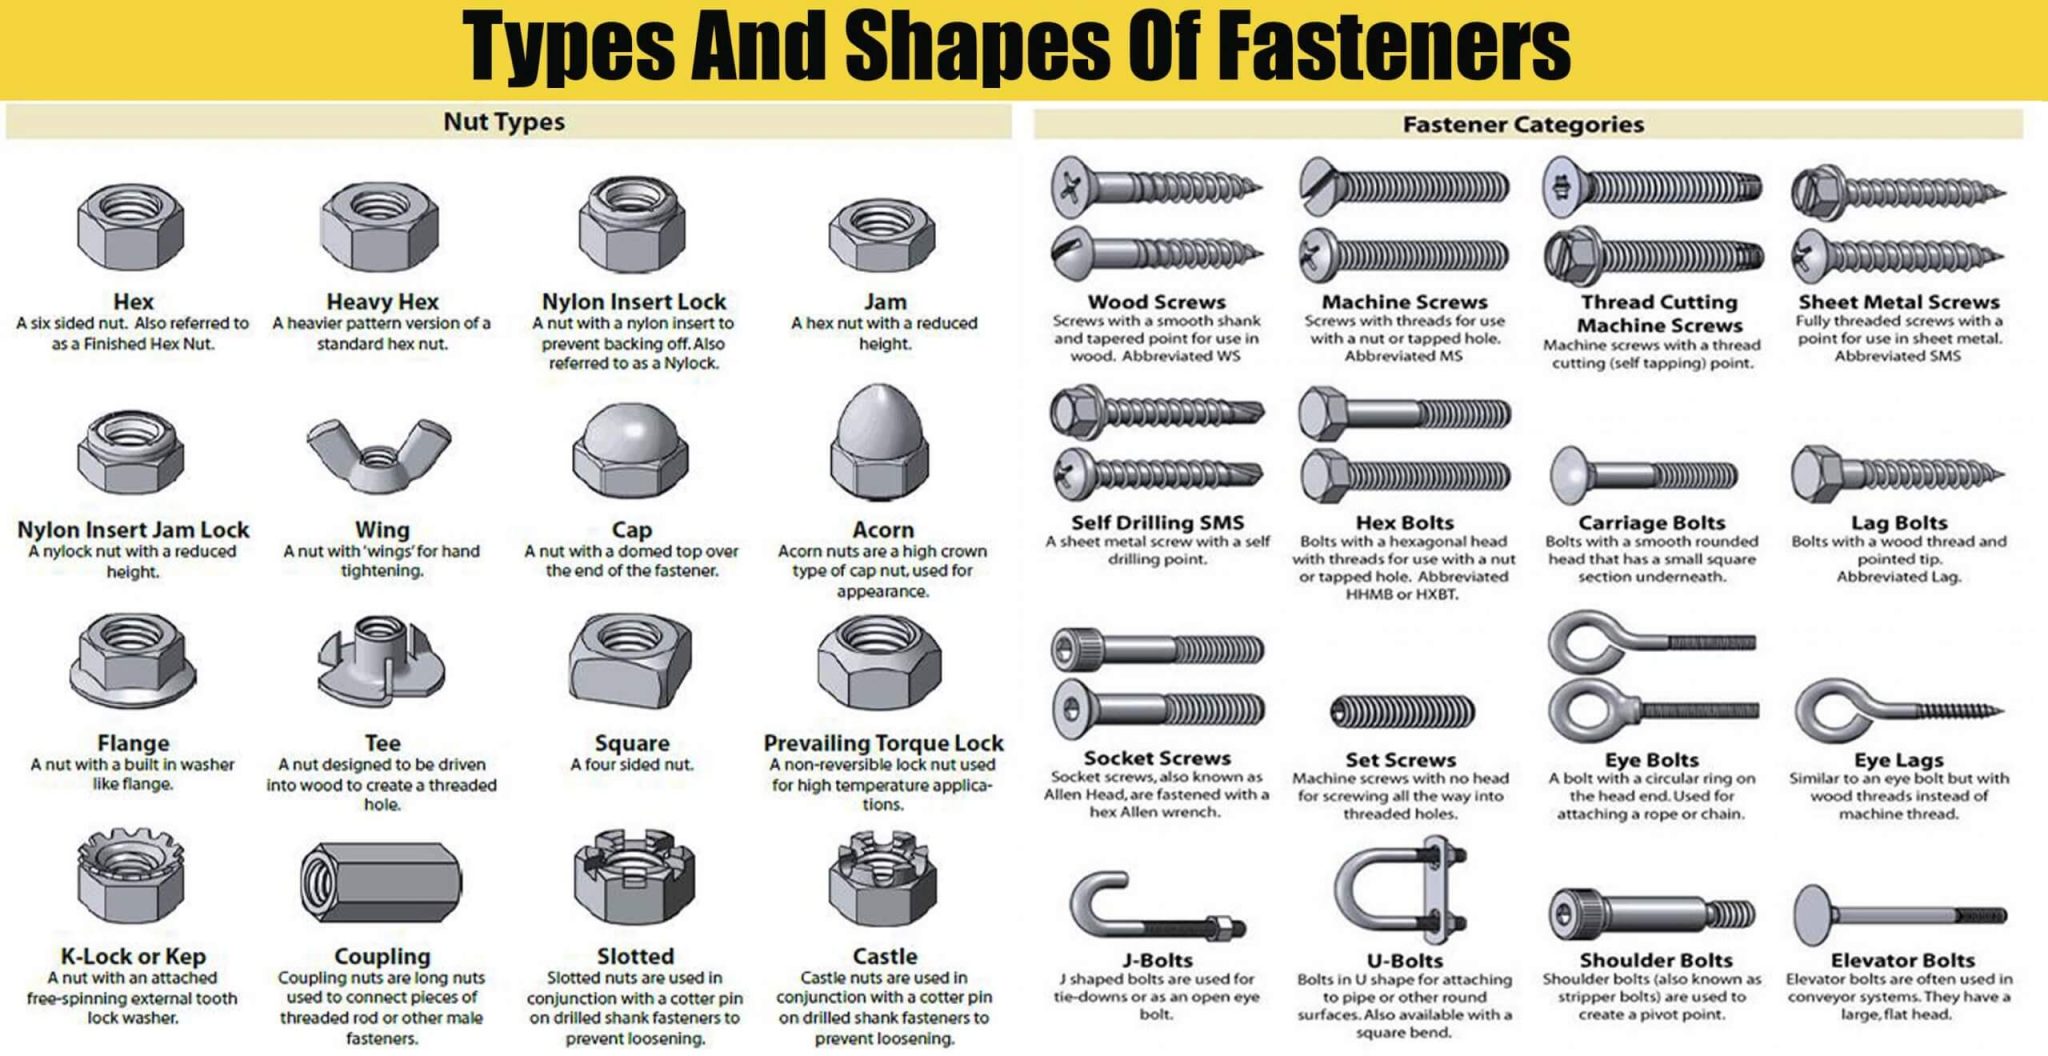 Types And Shapes Of Fasteners, Nuts, Screw Head, And washers ...